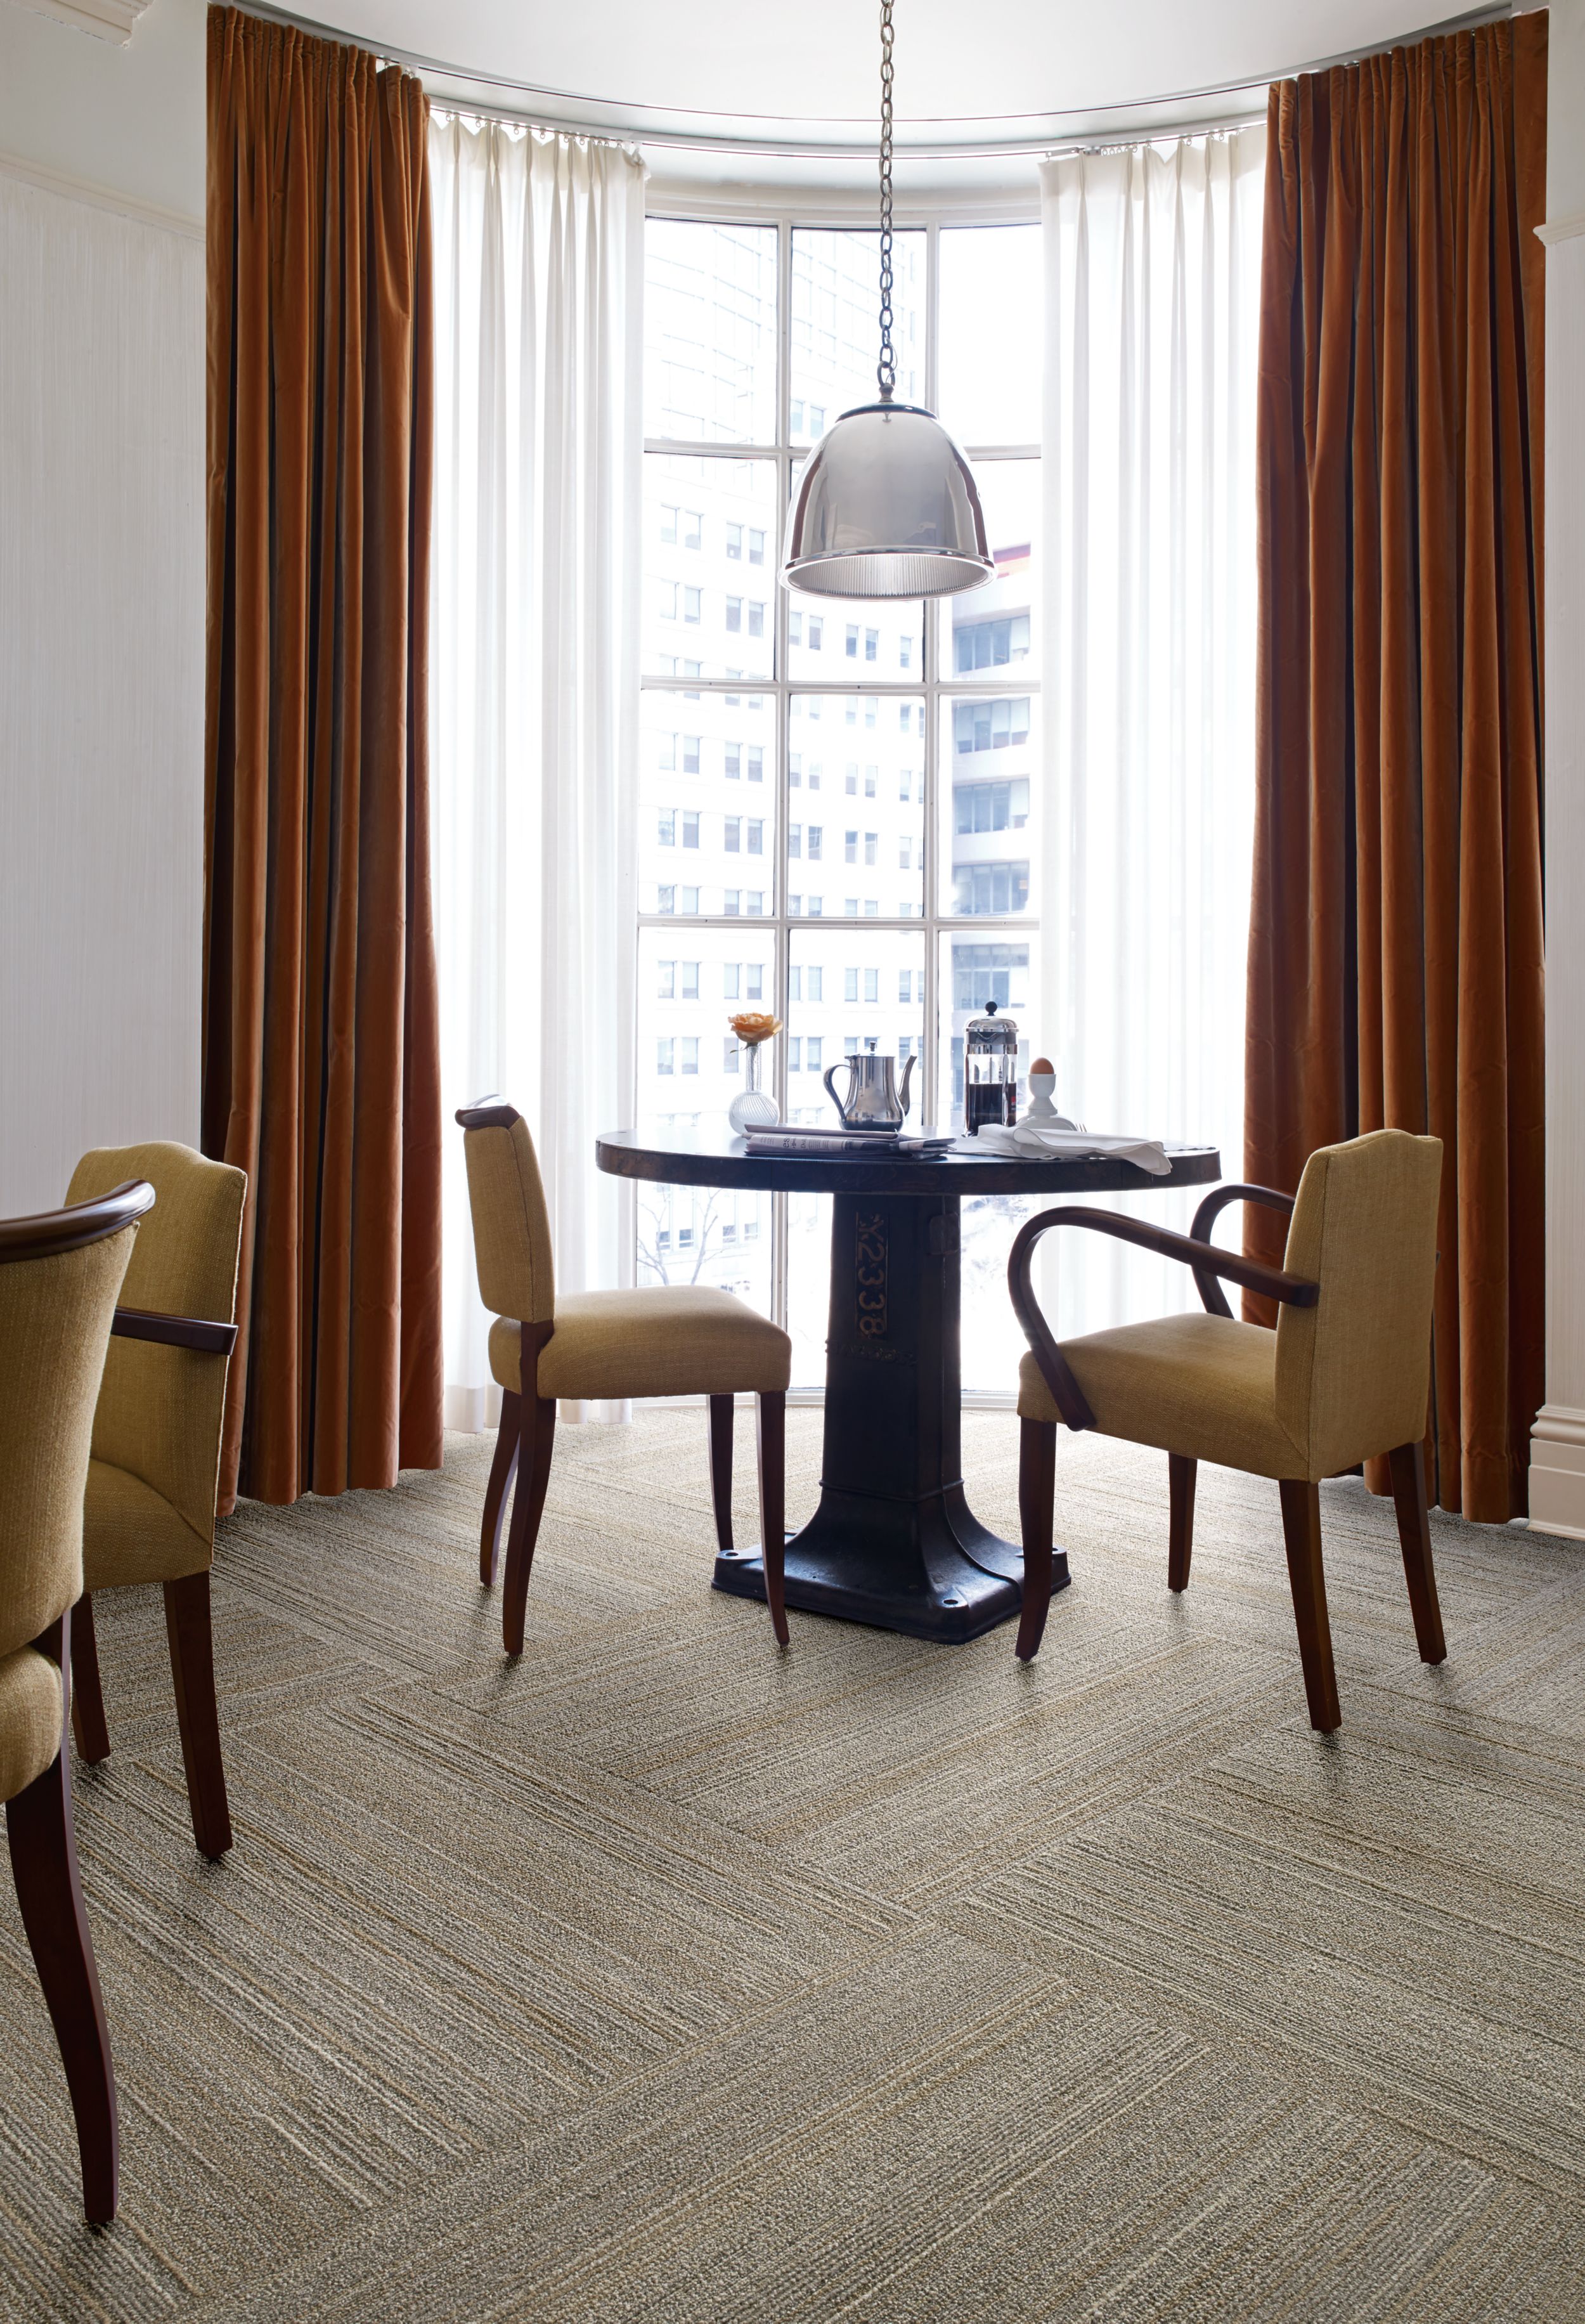 Interface NF400 plank carpet tile at small breakfast table in front of window Bildnummer 7